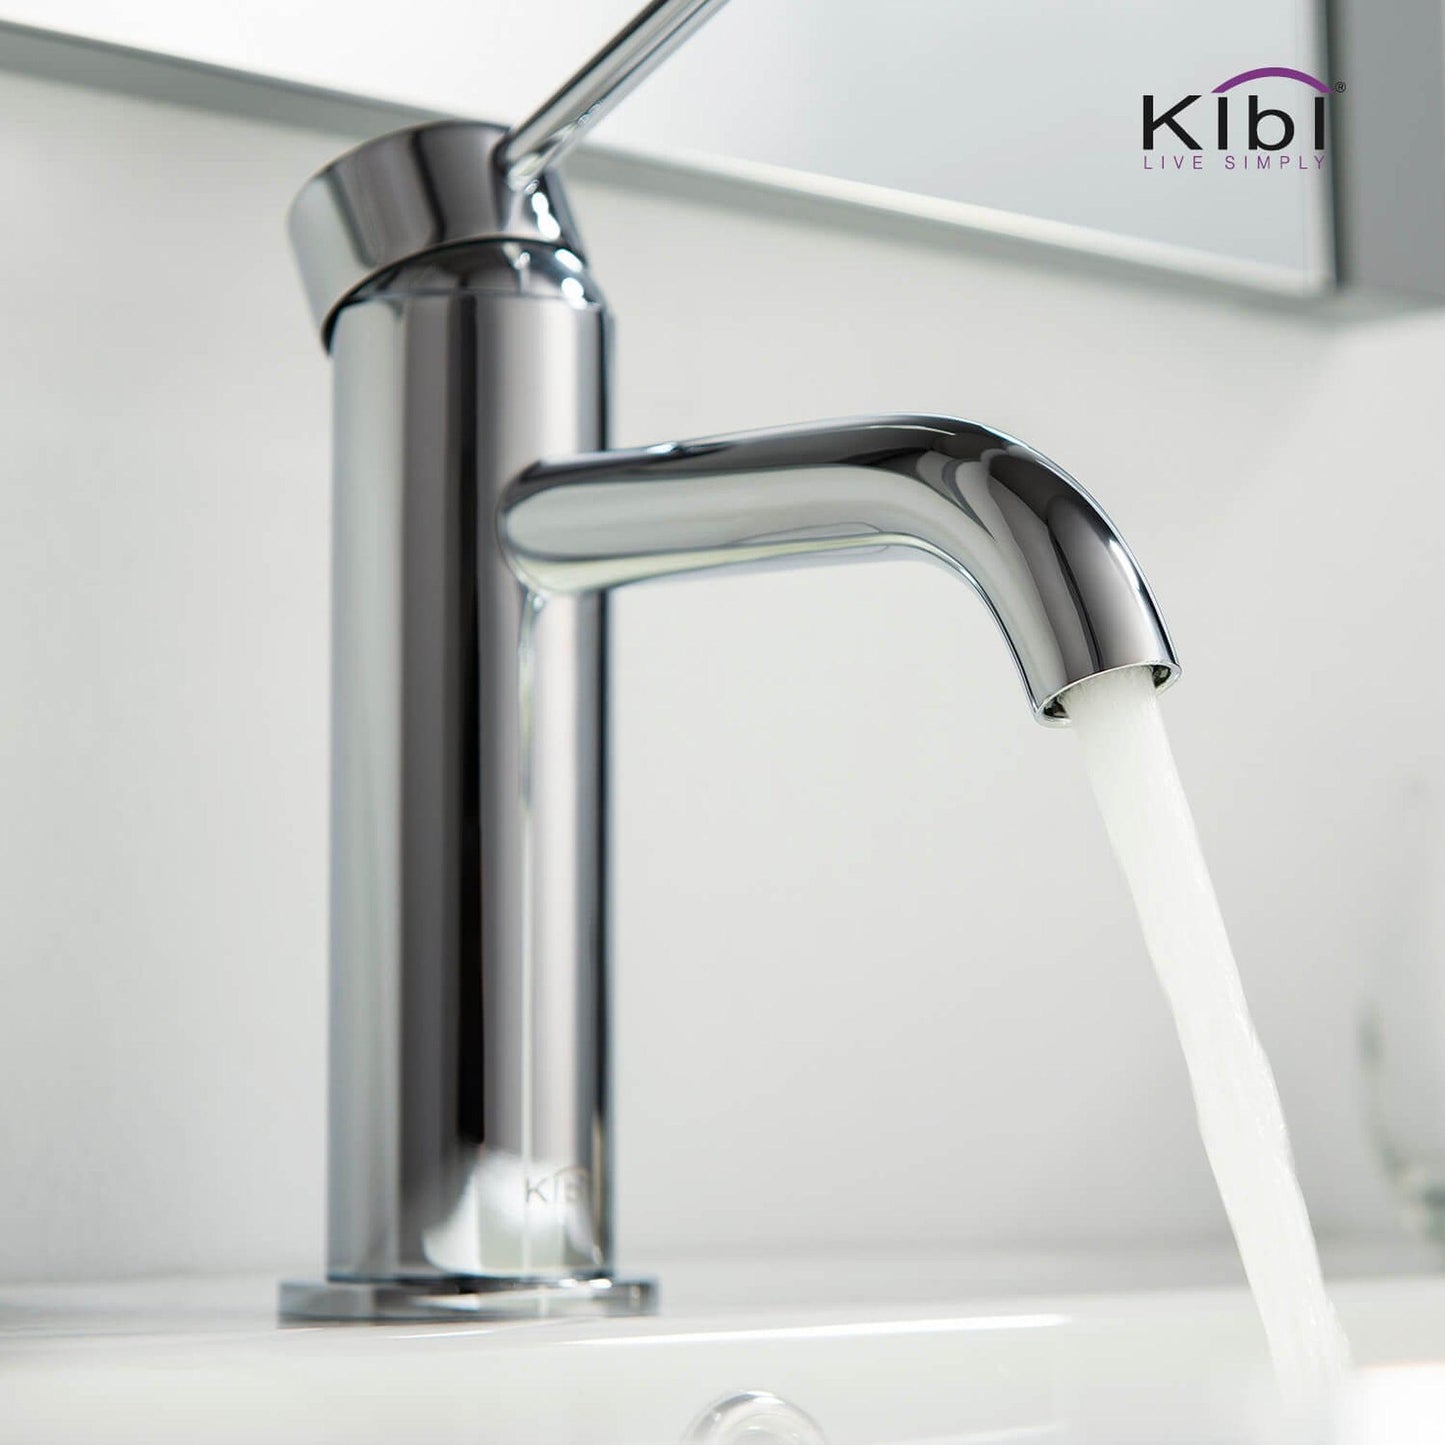 KIBI Circular Single Handle Chrome Solid Brass Bathroom Sink Faucet With Pop-Up Drain Stopper Small Cover With Overflow